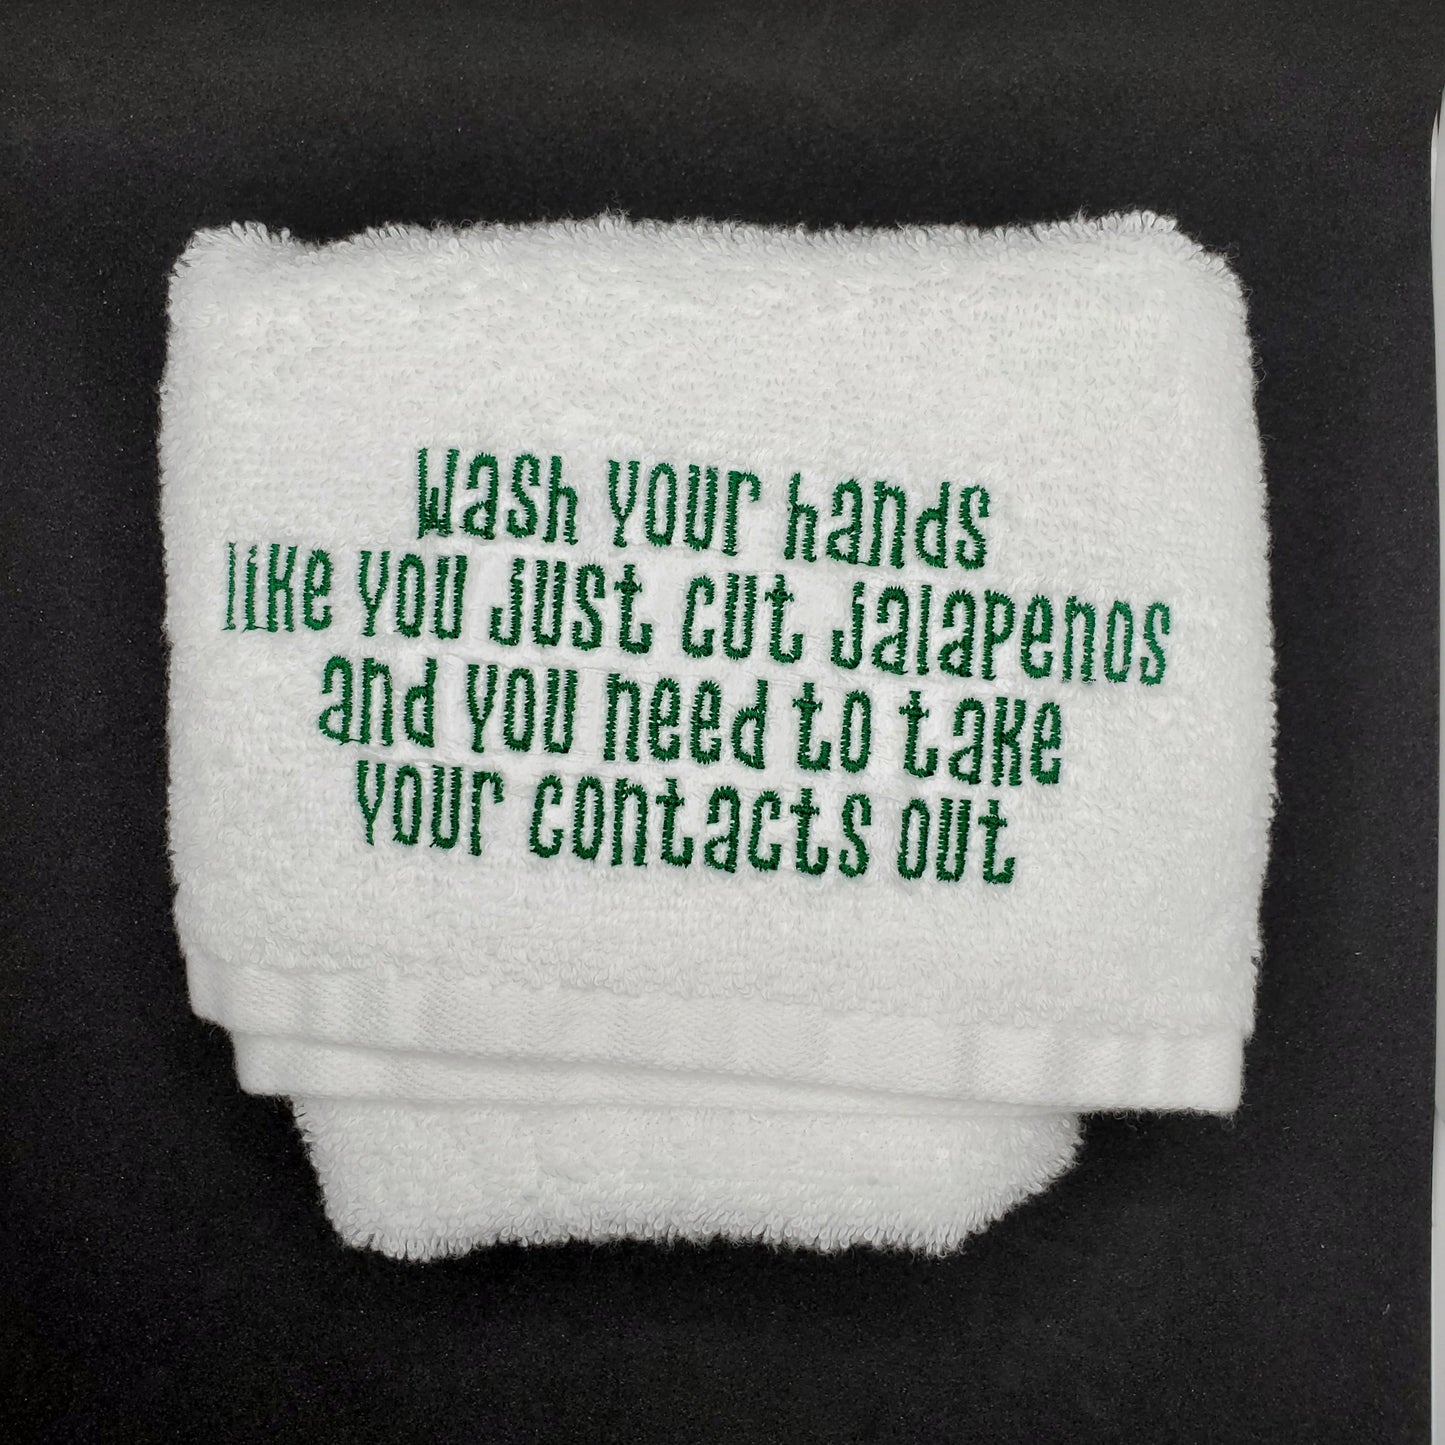 Wash your hands-jalapeno and contacts